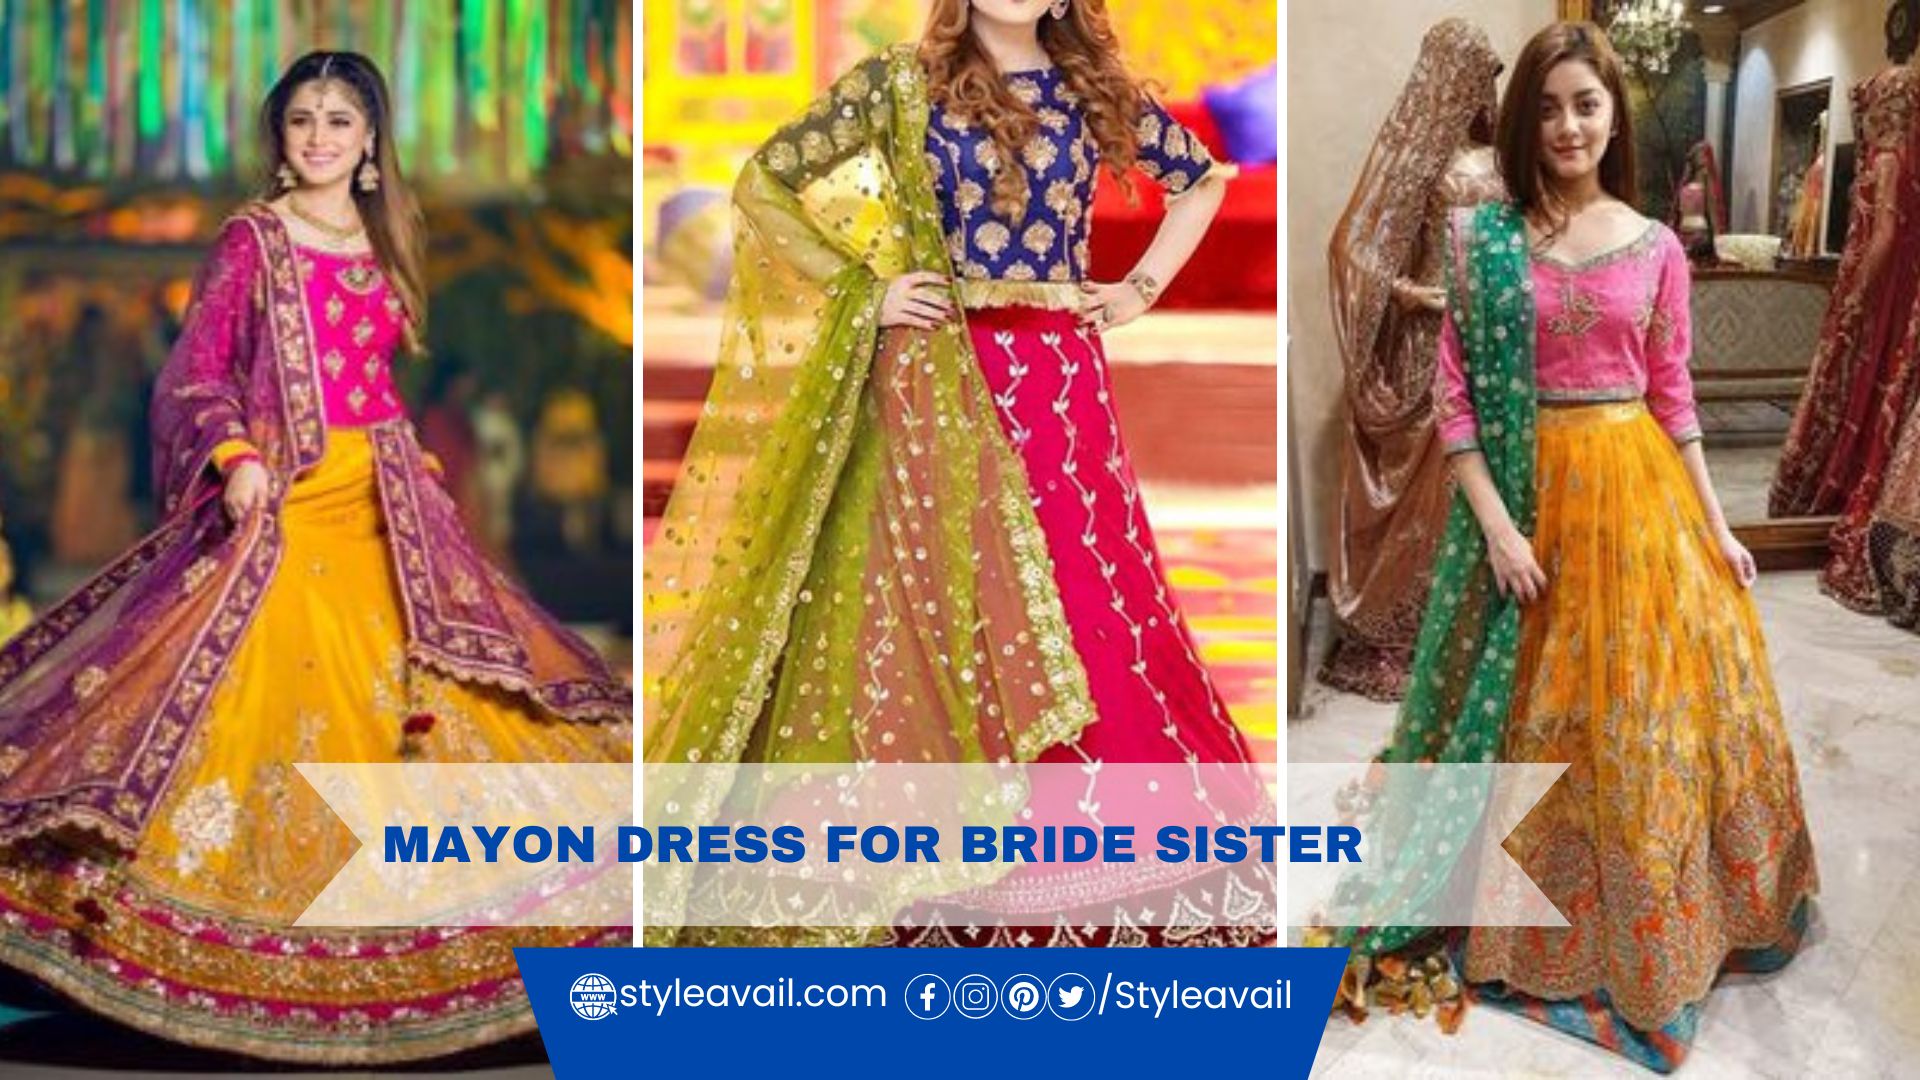 Mayon Dress for Bride Sister